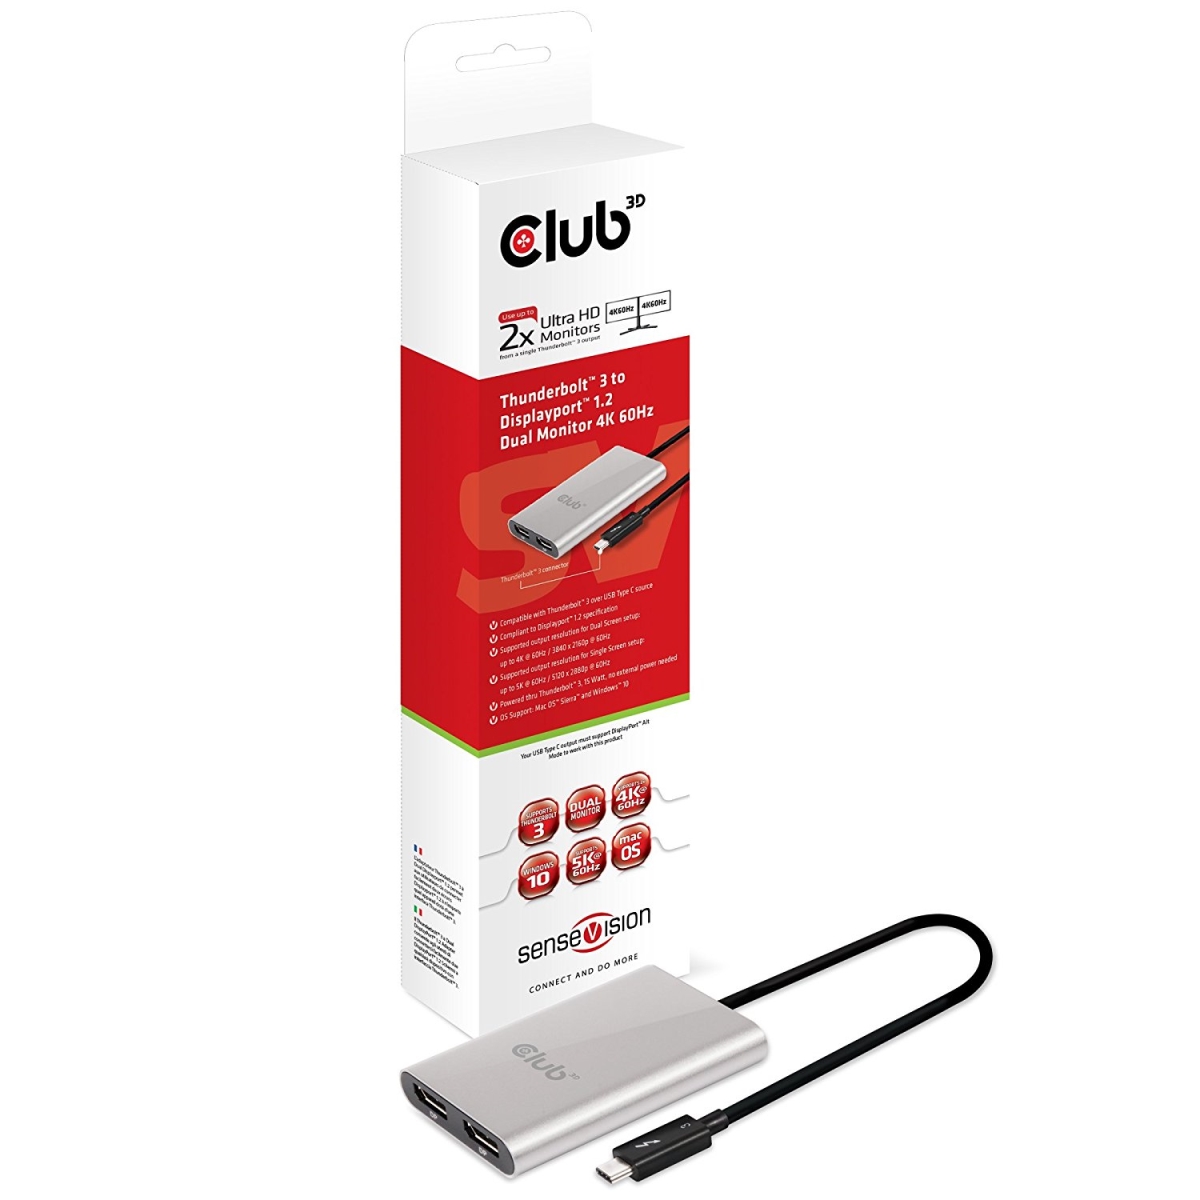 Picture of Club 3D CSV-1577 SenseVision Thunderbolt 3 to Dual Displayport 1.2 Adapter